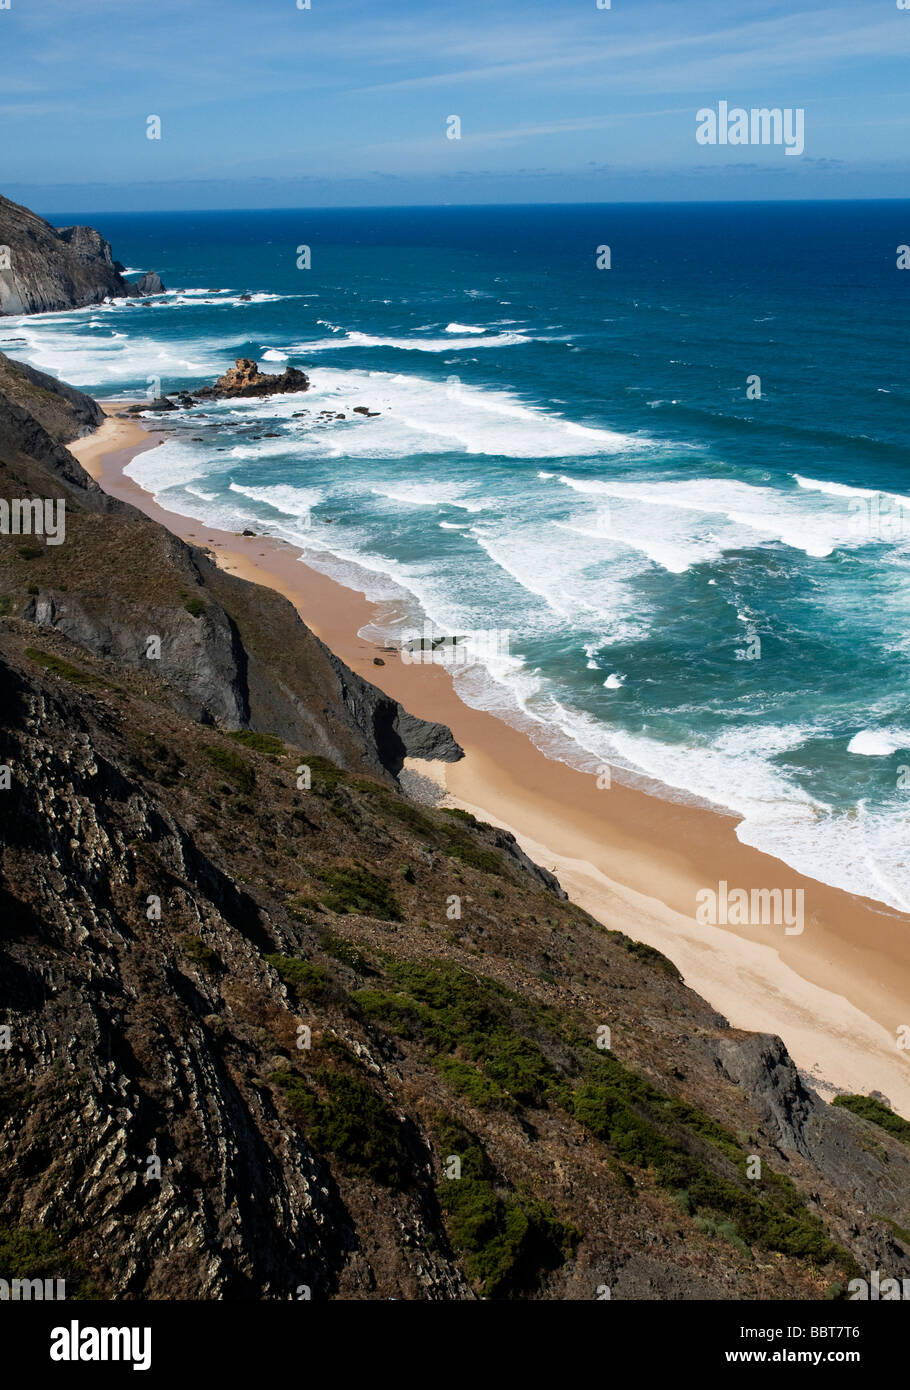 A deserted beach in the western Algarve, southern Portugal Stock Photo